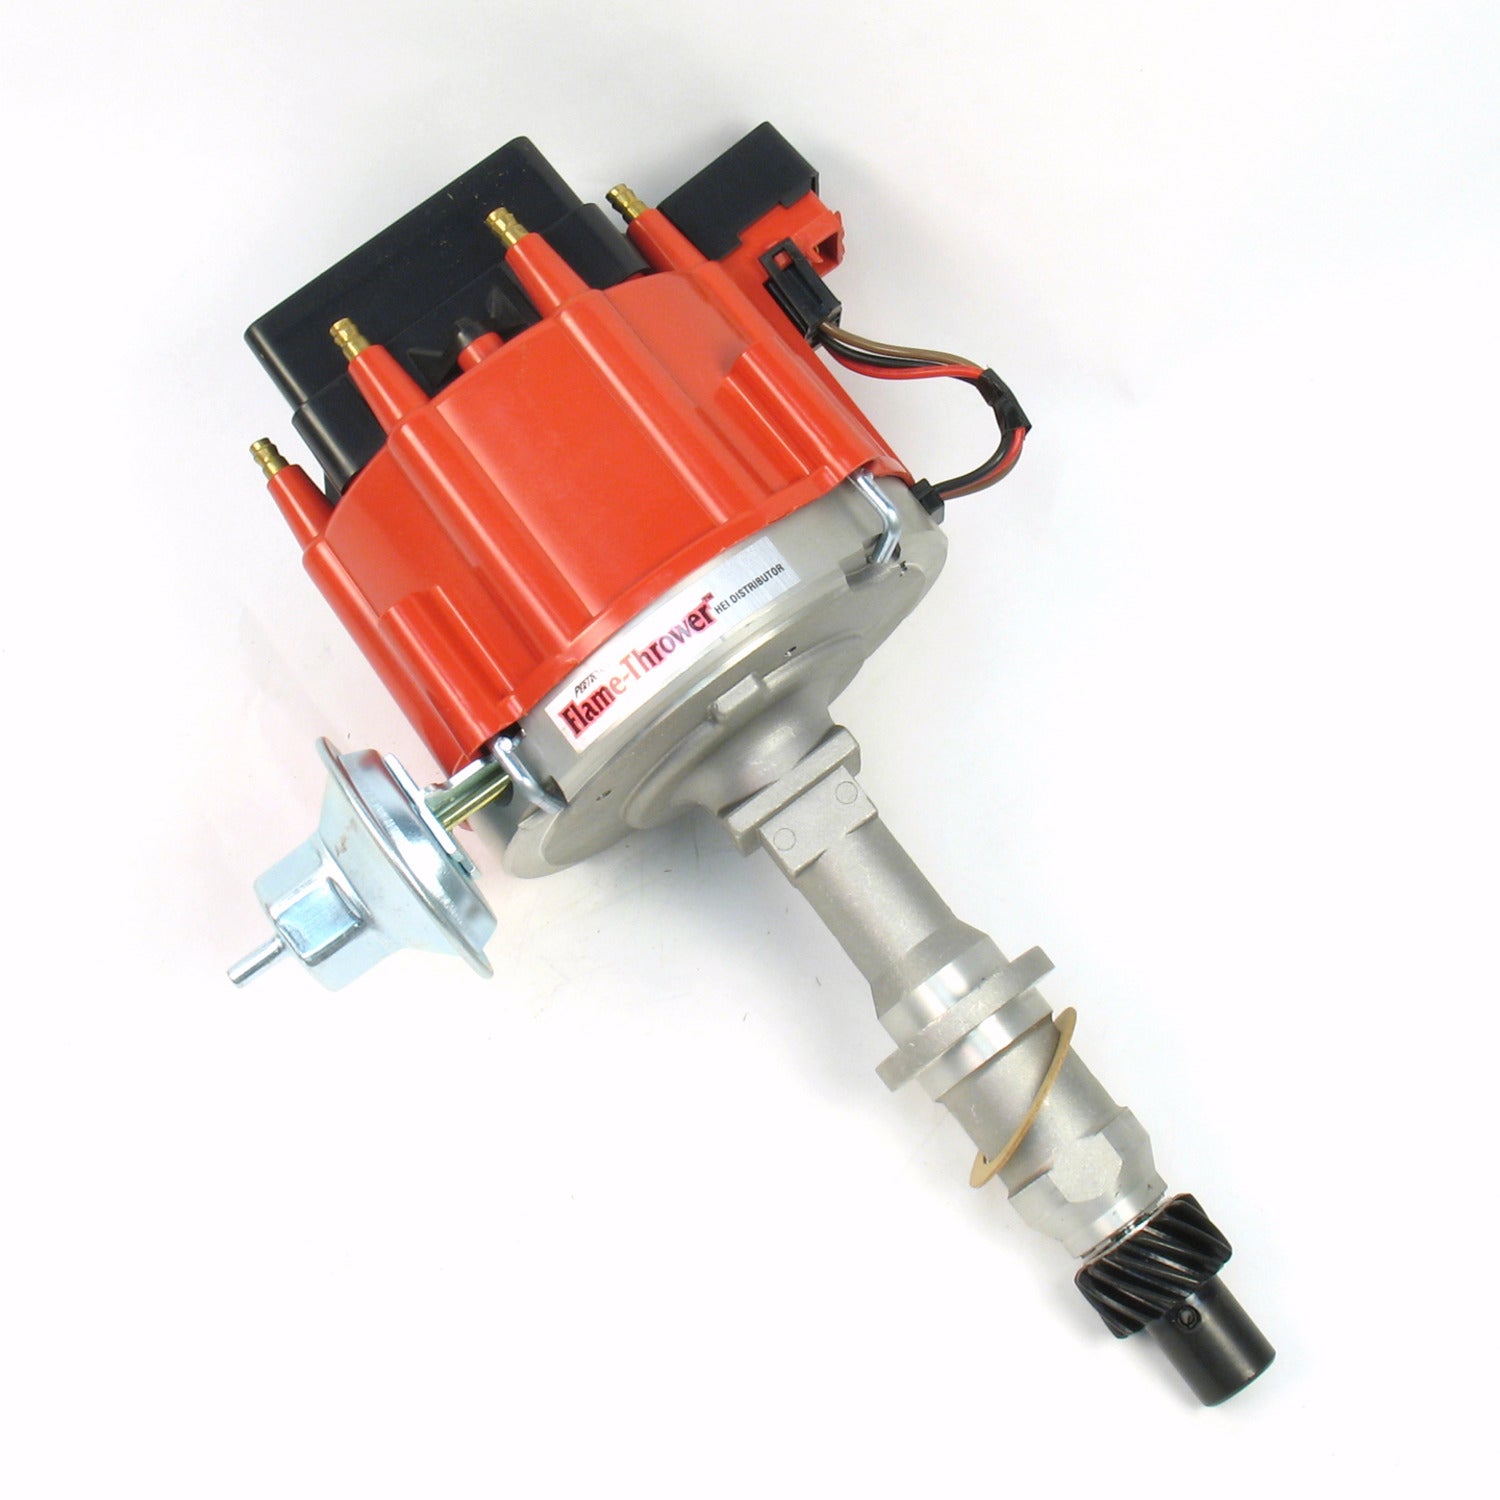 PerTronix D71201 Flame-Thrower Distributor HEI III Pontiac 301-455 Red Cap with multiple sparks and an adjustable digital rev limiter